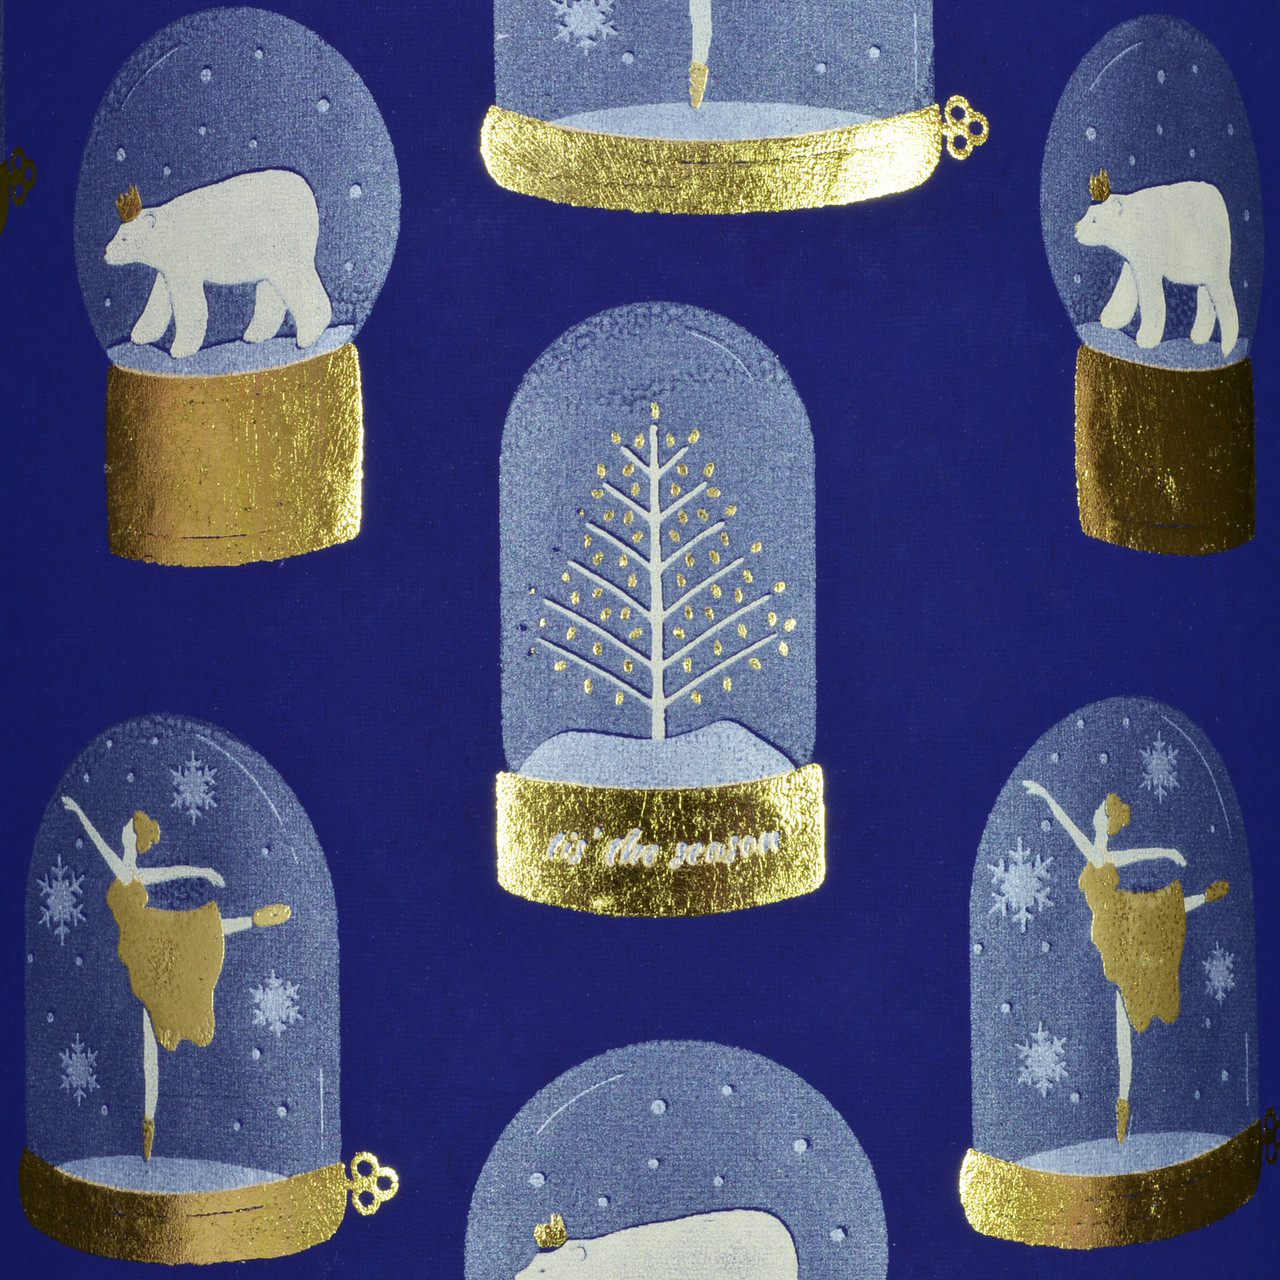 Christmas Holiday Washi Tape - 21 Rolls Winter Washi Gold Foil Duct Tape